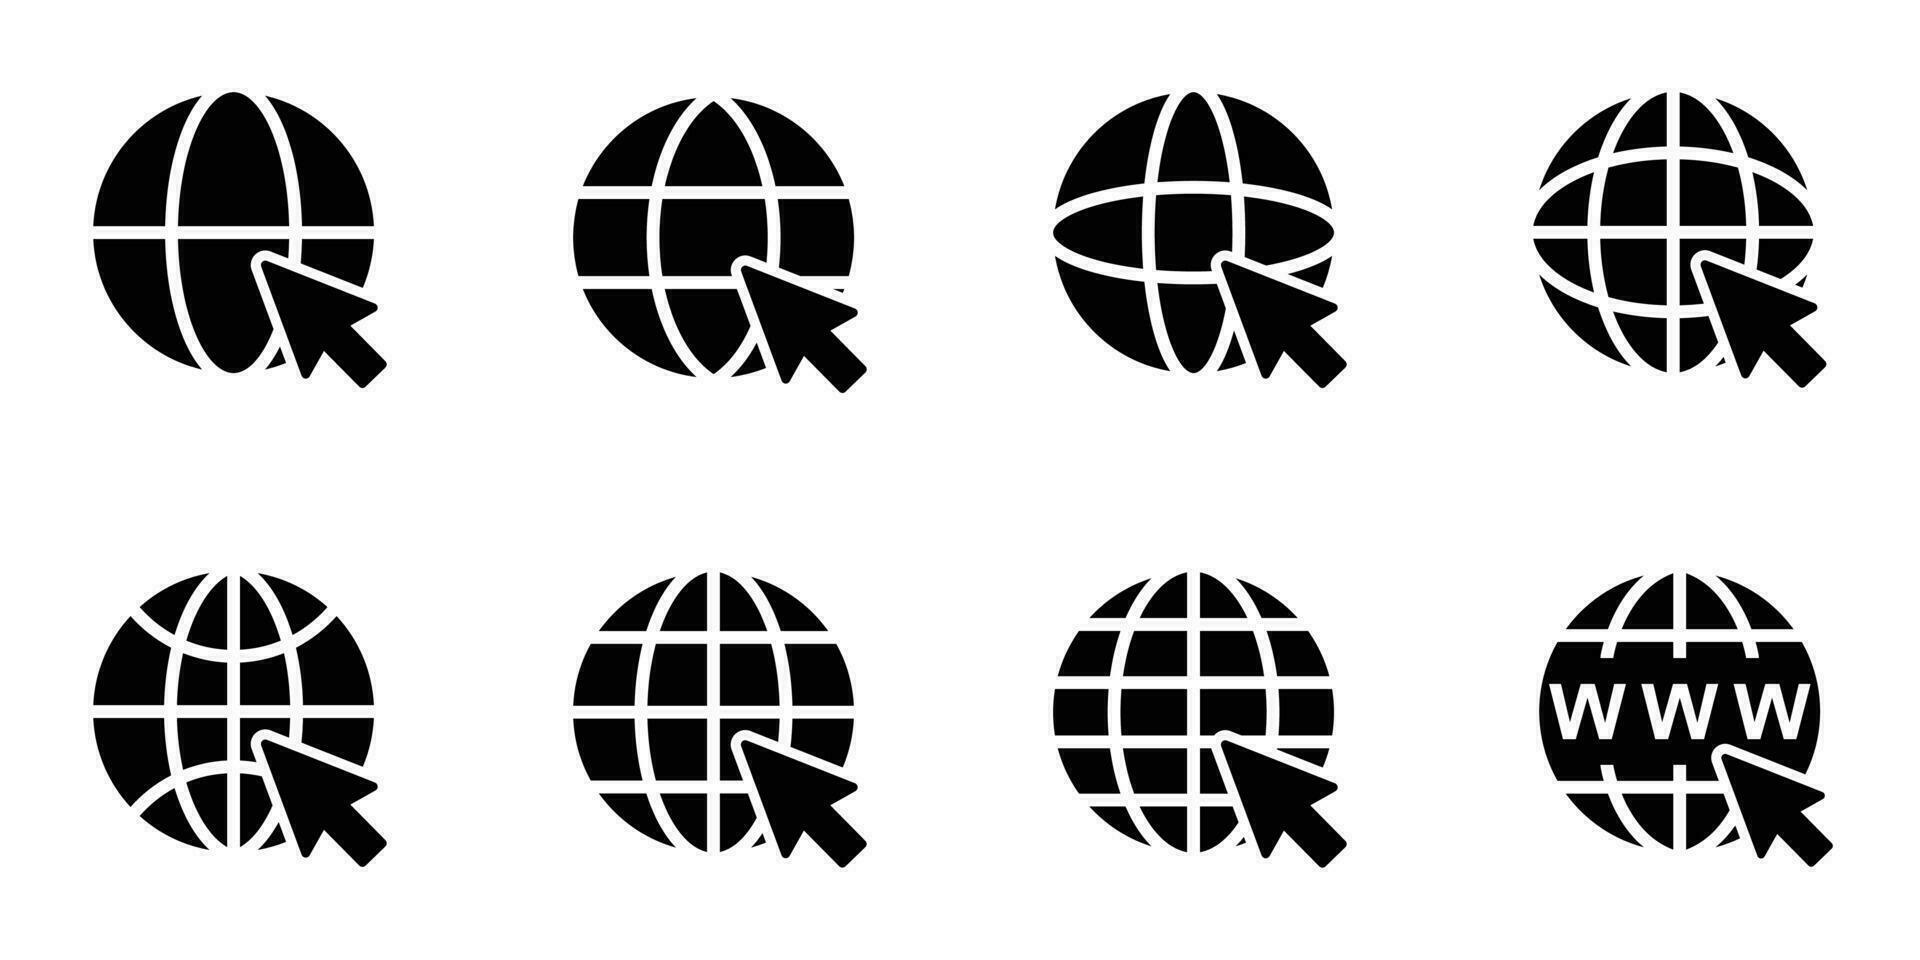 Go to web icon set. Globe with cursor. Site, internet click concept. Vector illustration isolated on white background. EPS 10.